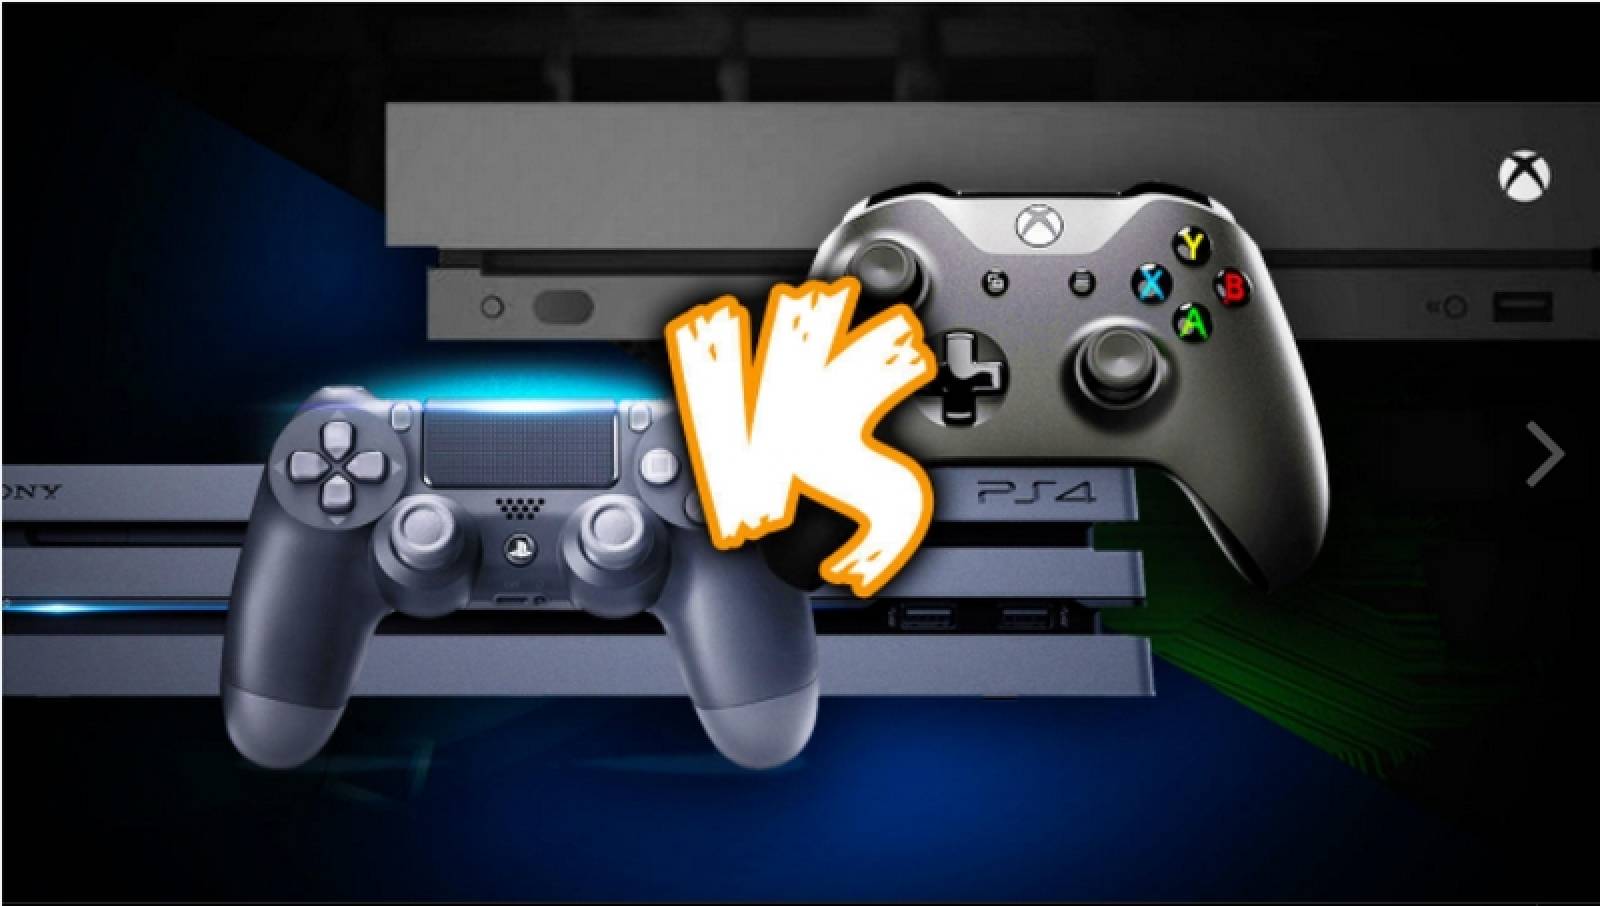 Xbox One X vs PS4 Pro: What's the ultimate 4K gaming machine?